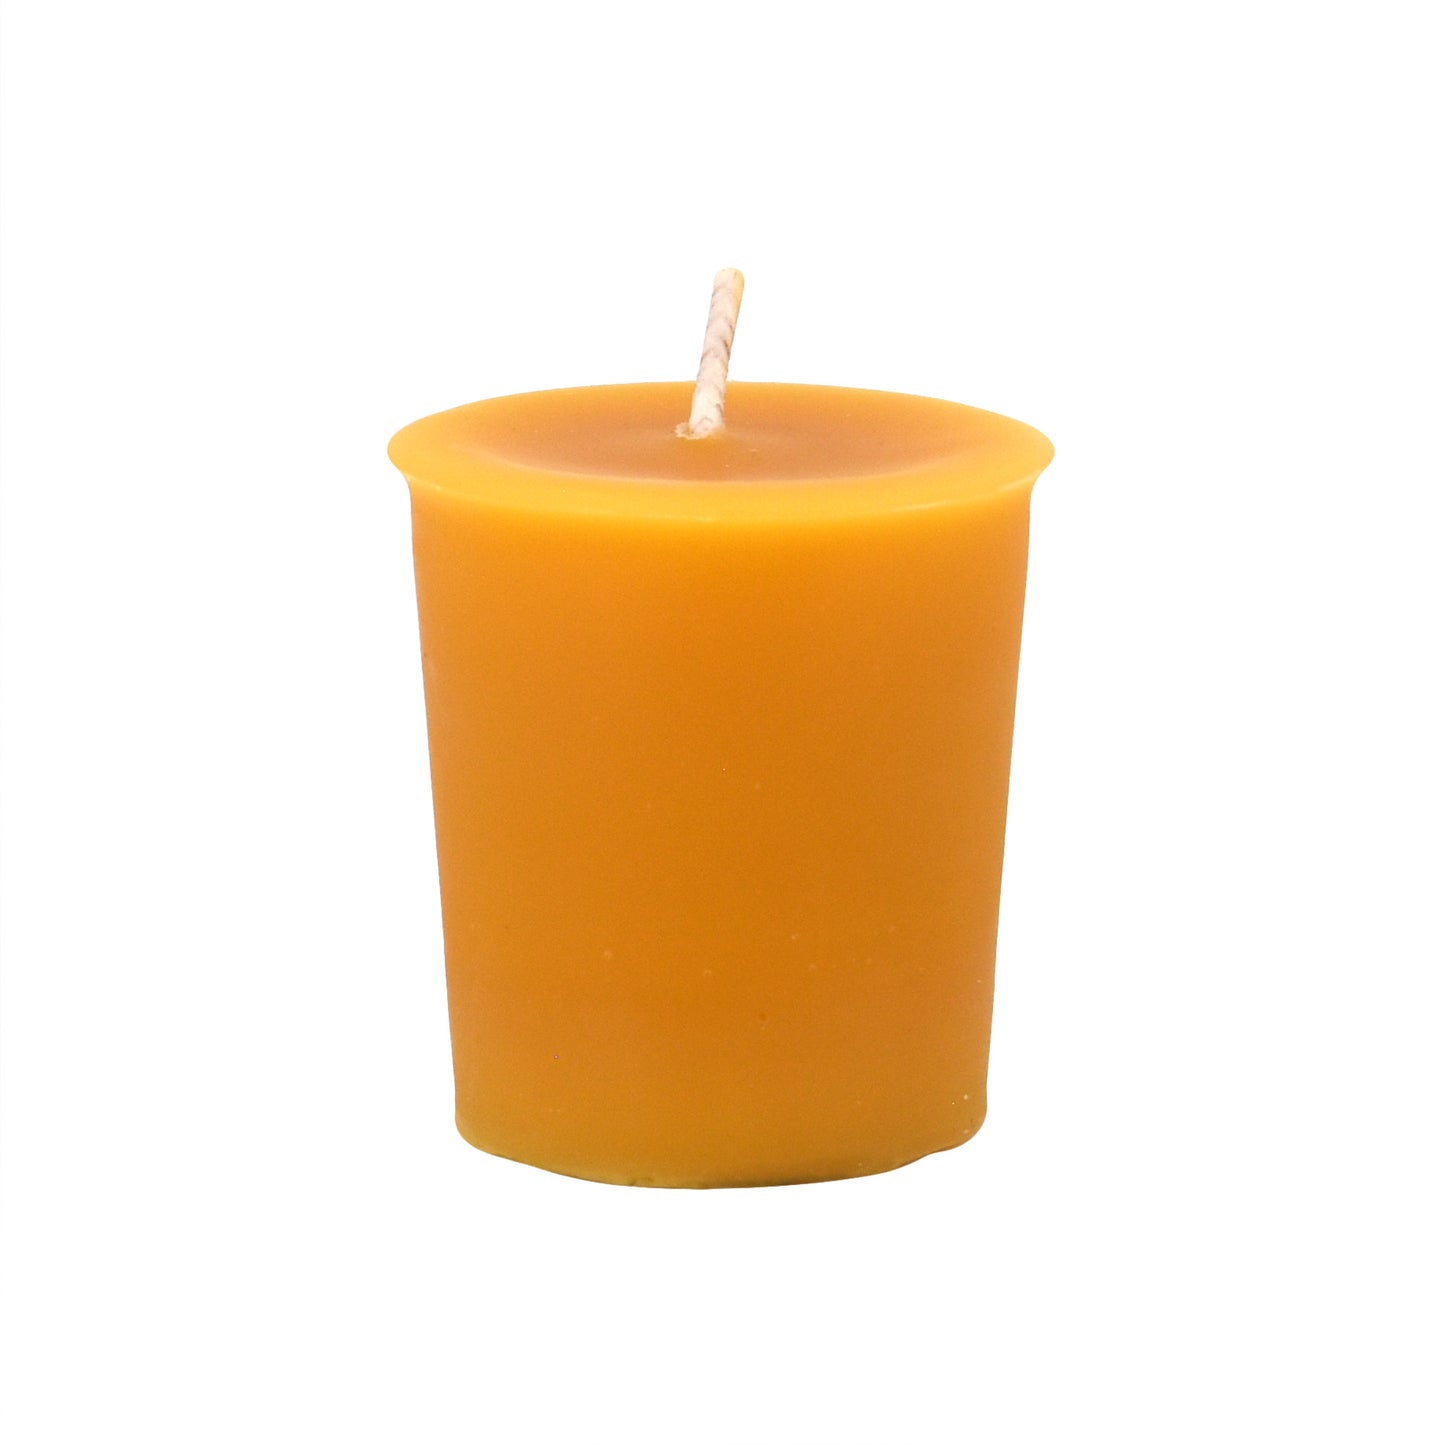 Kootenay Forest Beeswax Votive Candle